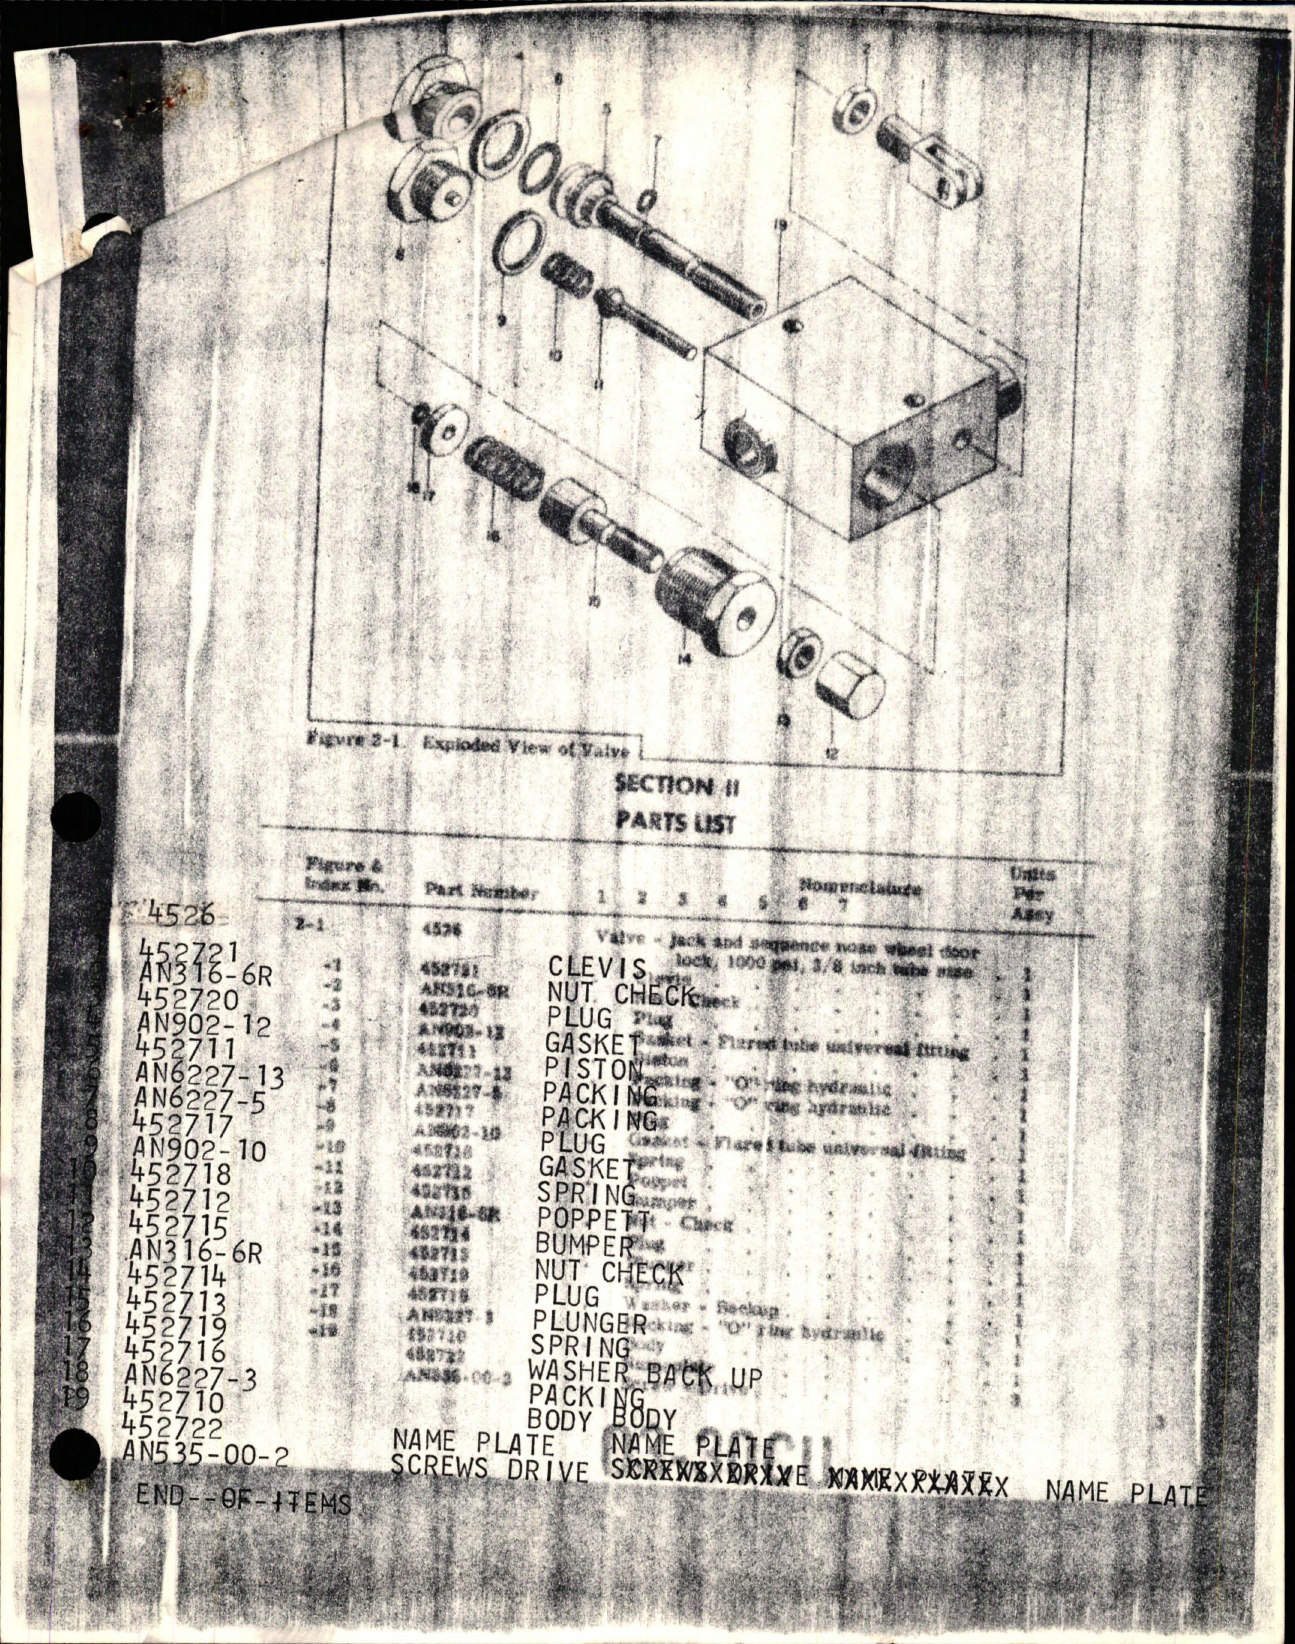 Sample page 5 from AirCorps Library document: Overhaul Instructions with Parts Catalog for Nose Wheel Door Lock Hydraulic System Jack & Sequence Valve - Model 4526